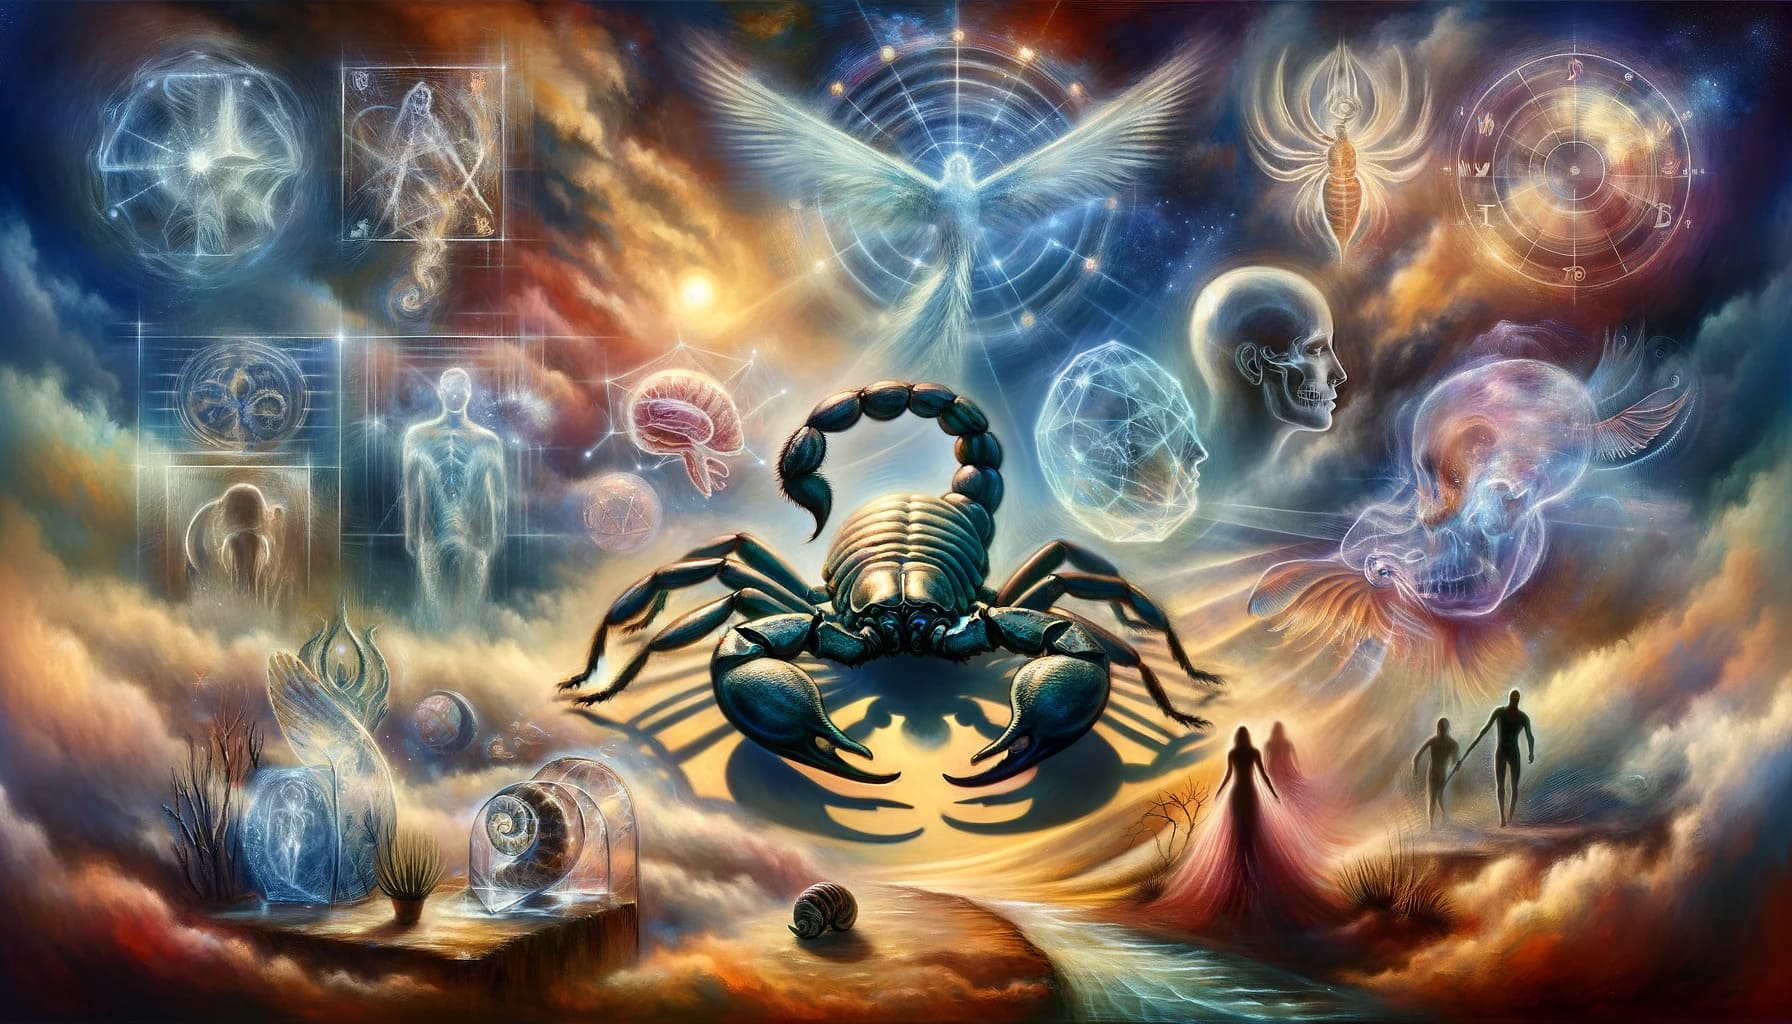 dreamlike surreal scene depicting the symbolic essence of scorpions in a dream. The scene shows a large ethereal scorpion with a potent sting rad